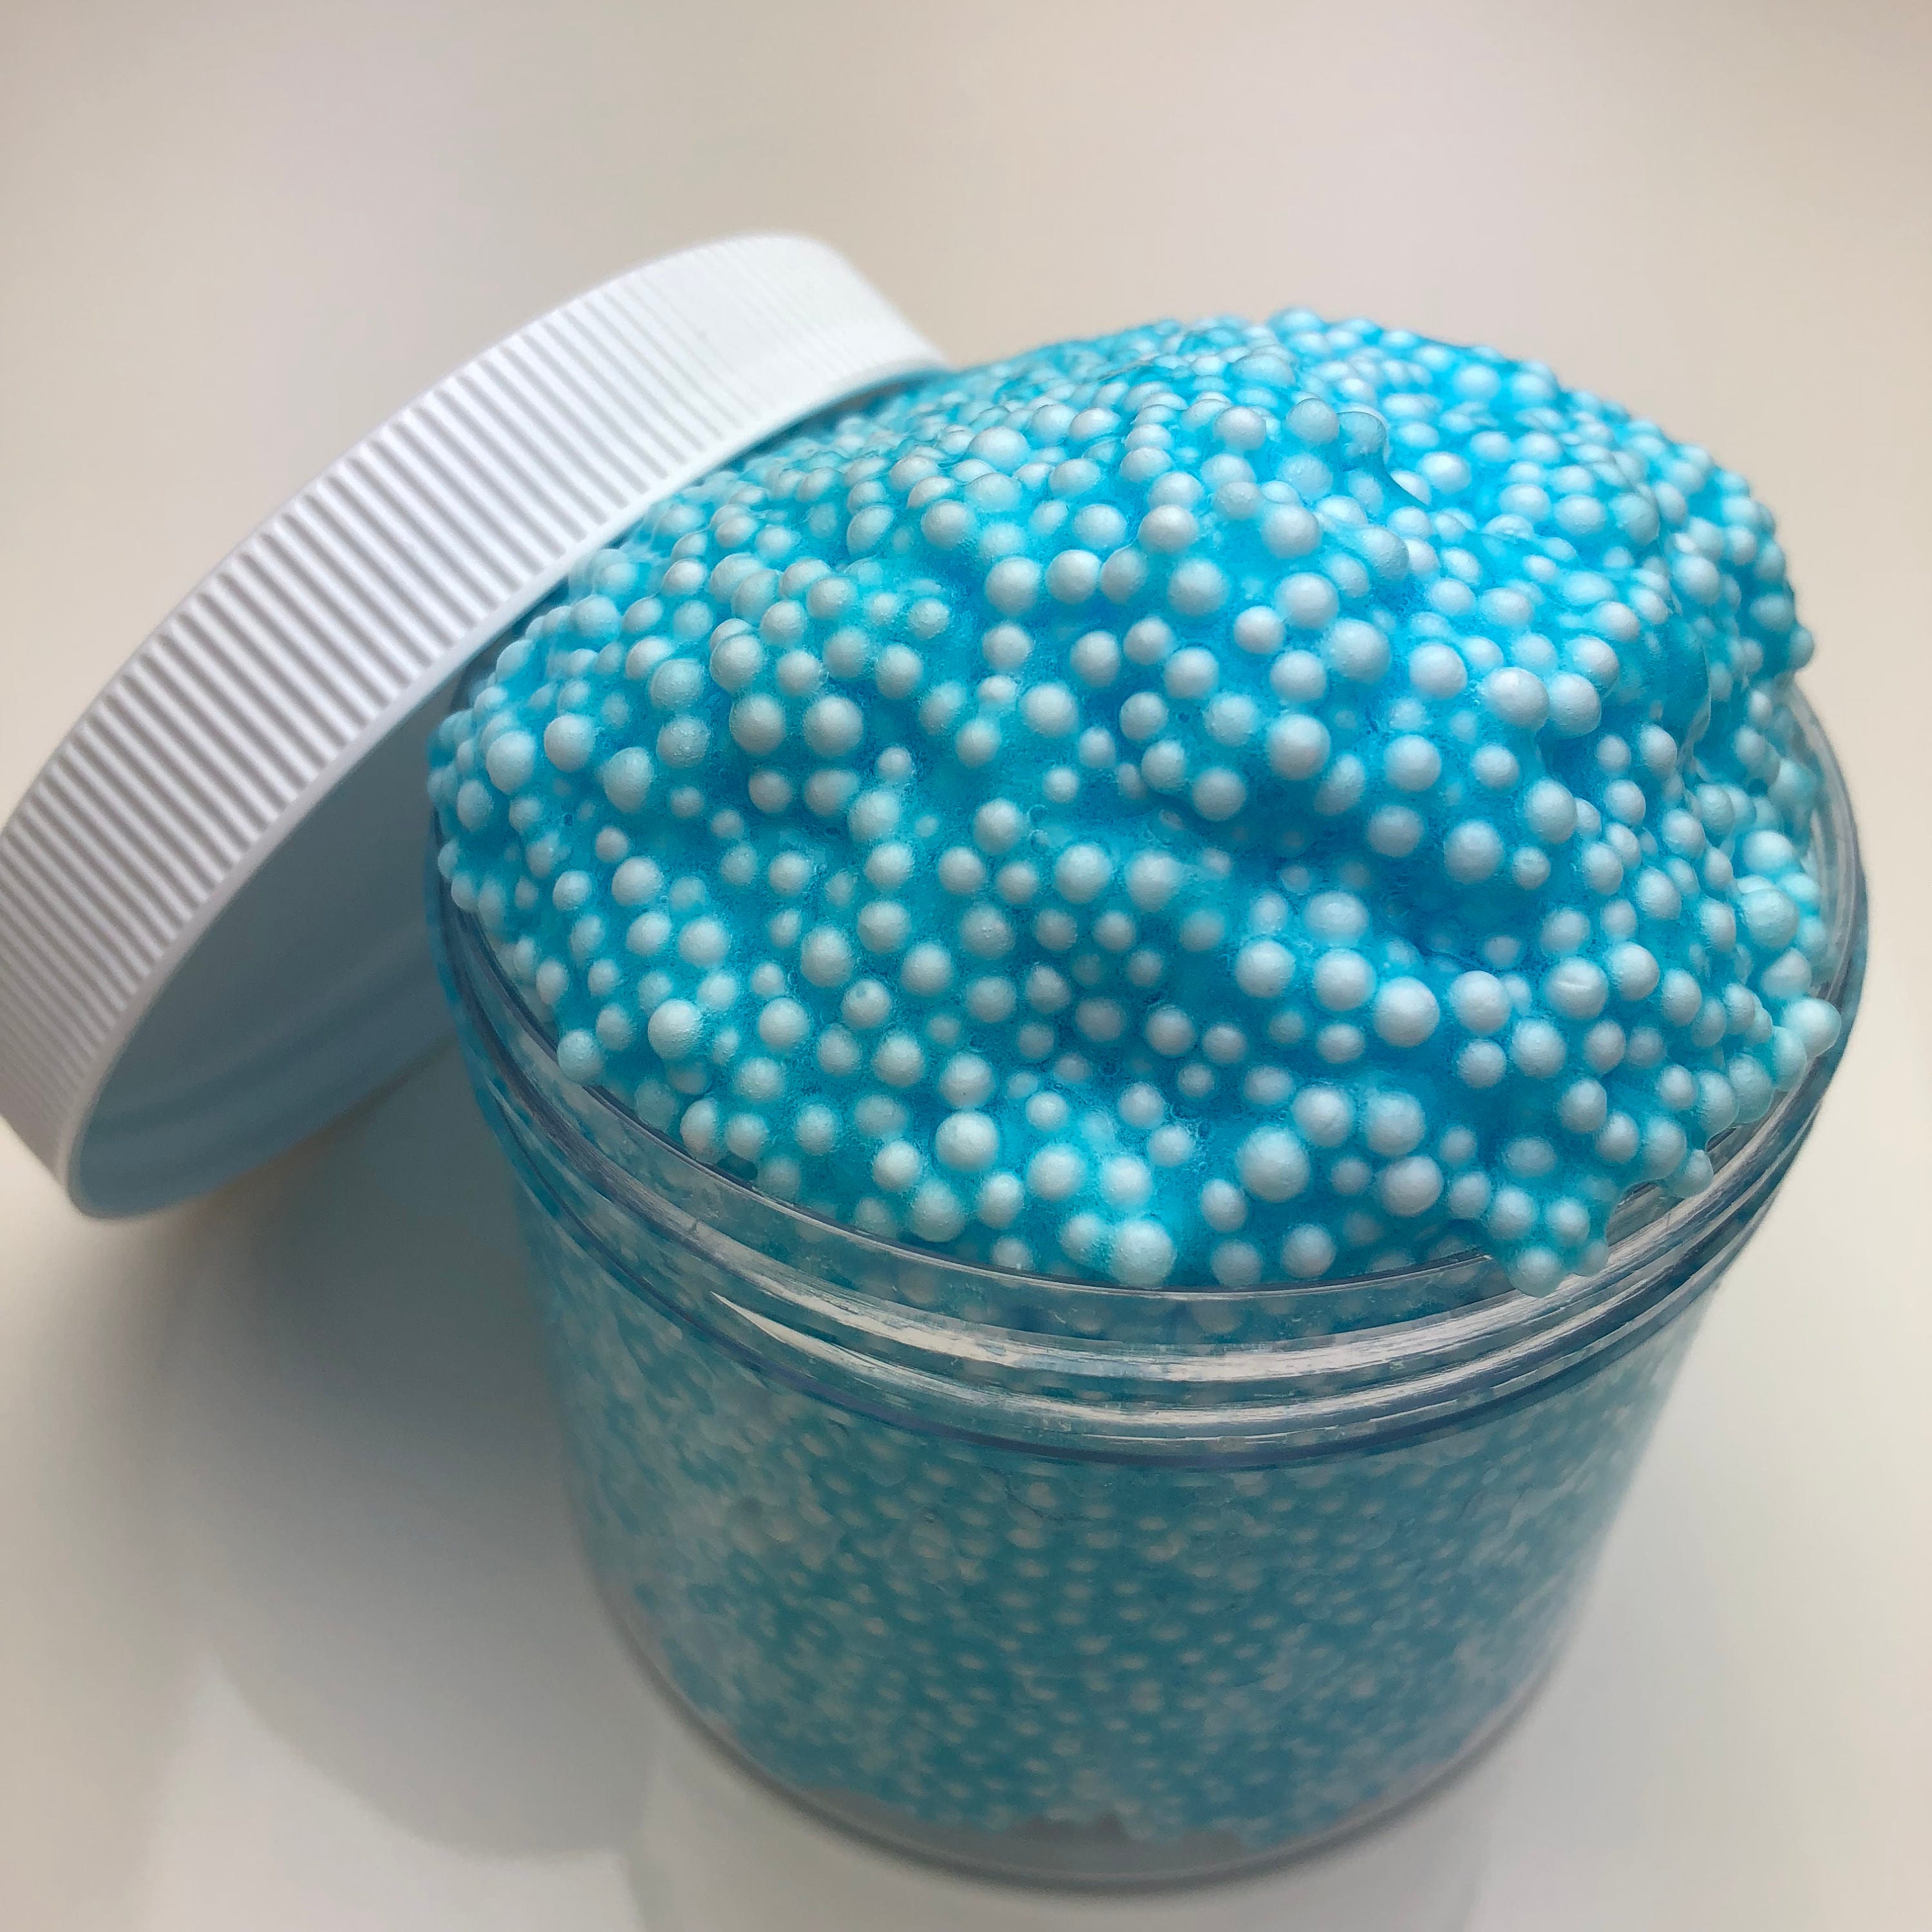 Blue Cotton Candy Floam Slime Clear Based Slime W/ Foam Beads scented 